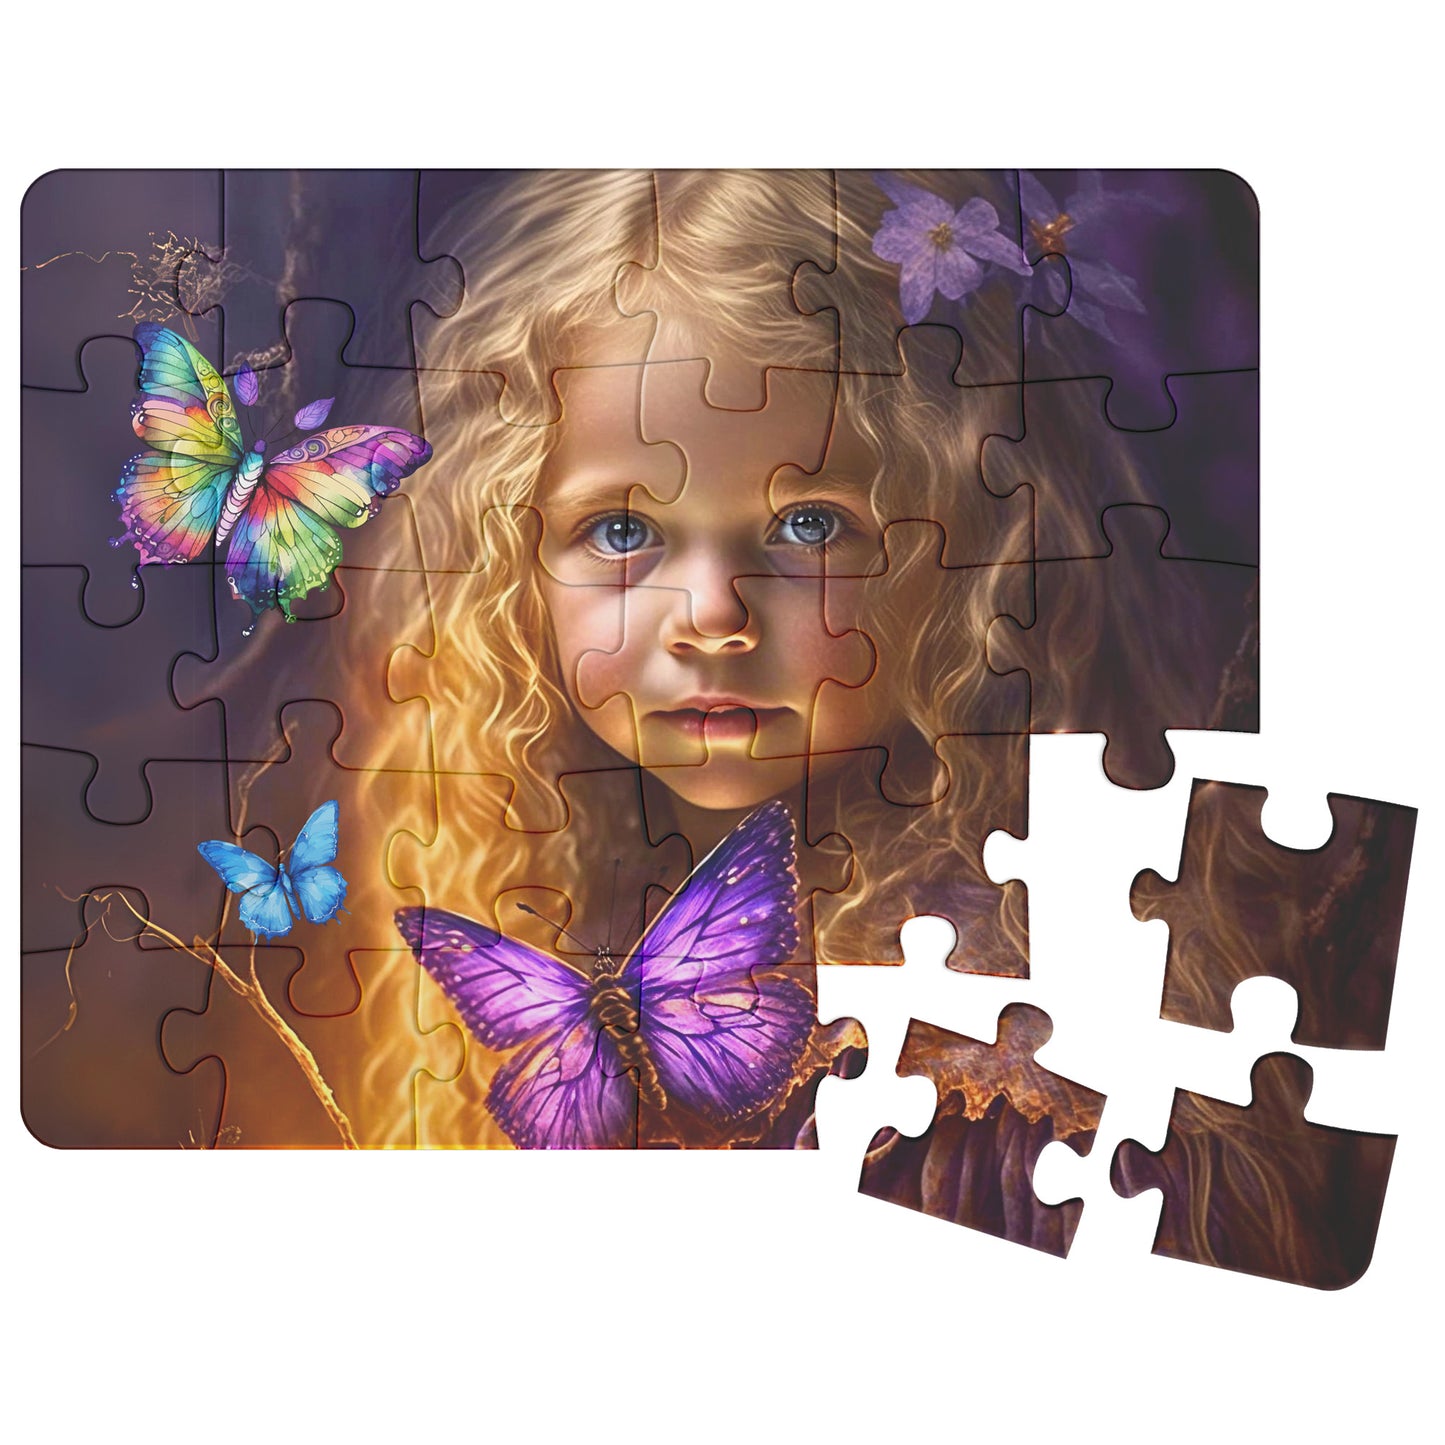 Jigsaw Puzzle - Lucy and the Enchanted Forest 3 (comes in 30, 110, 252, or 500 Piece)